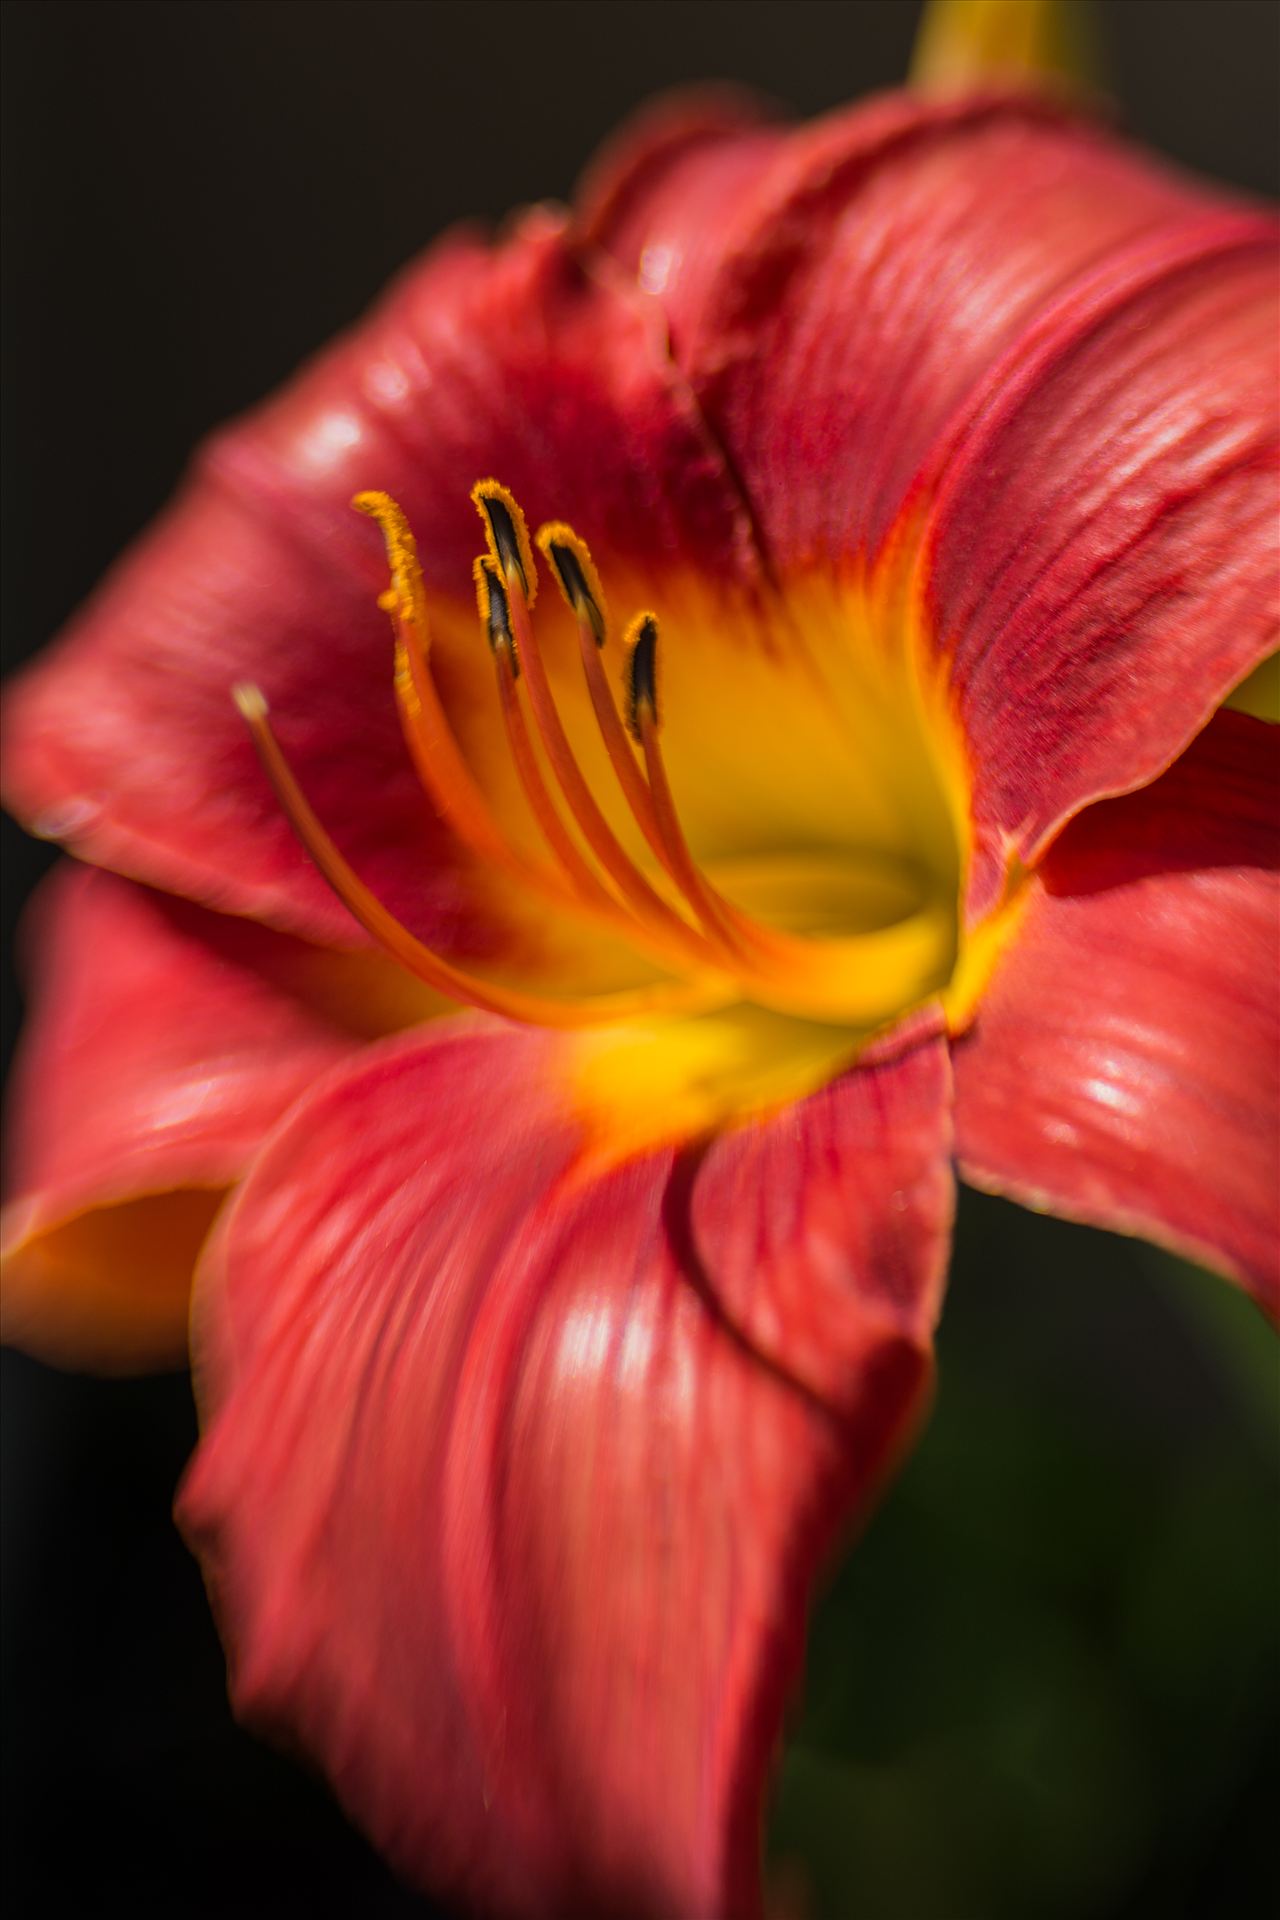 Wet Hawaiian Morning.jpg Lily facing the sun with dark background by Sarah Williams